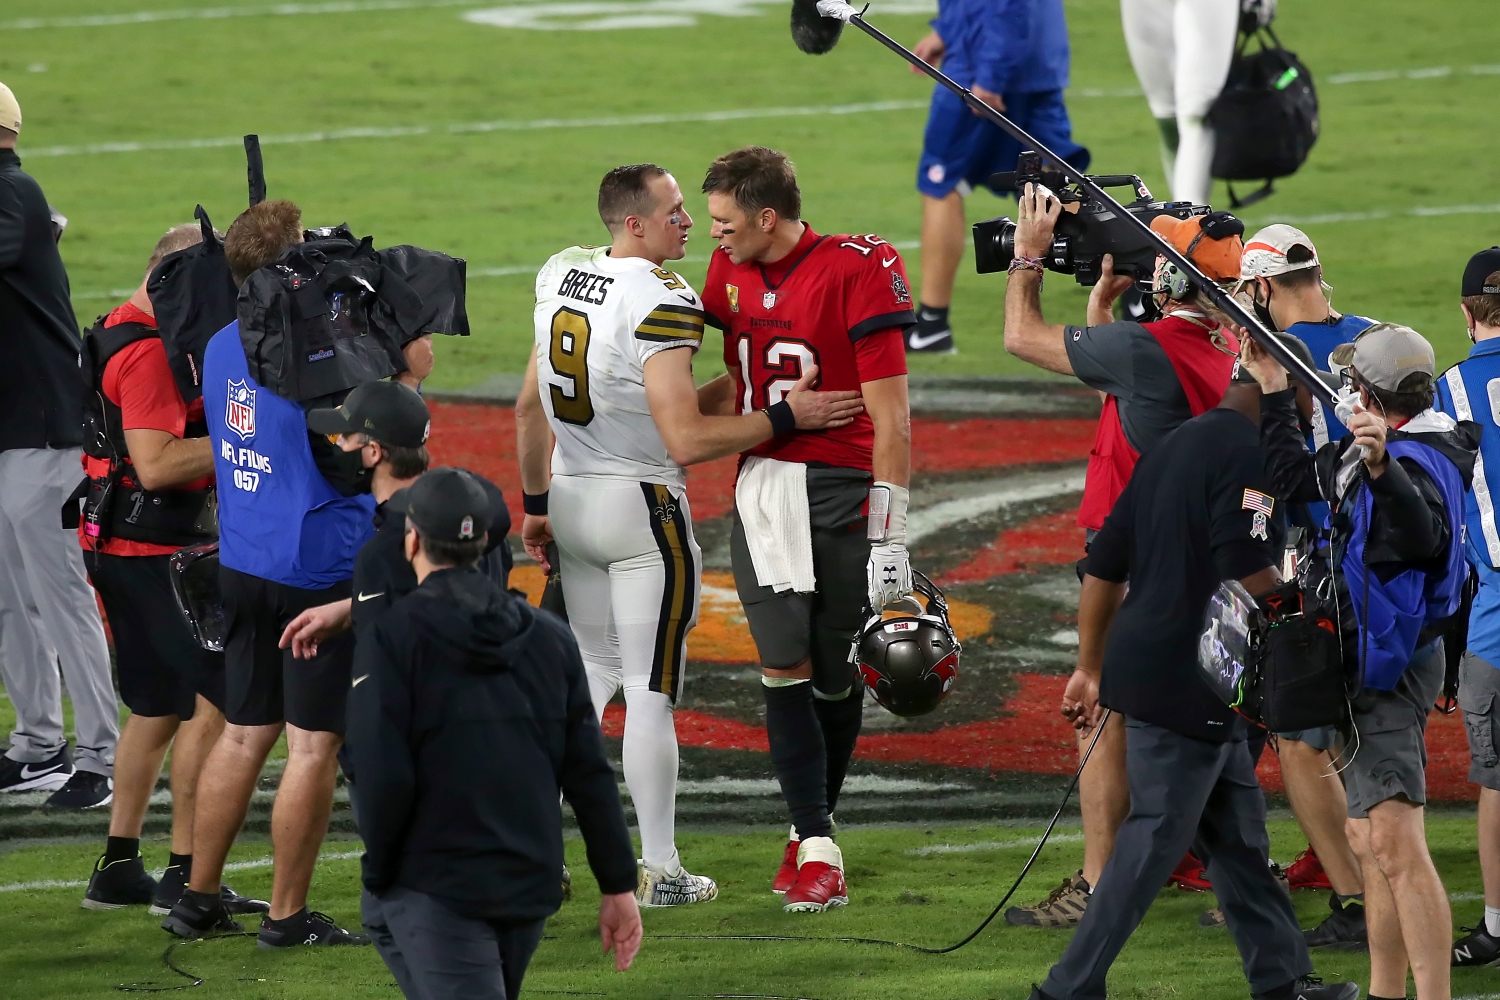 Drew Brees and Tom Brady embrace after a game between the Saints and Buccaneers.